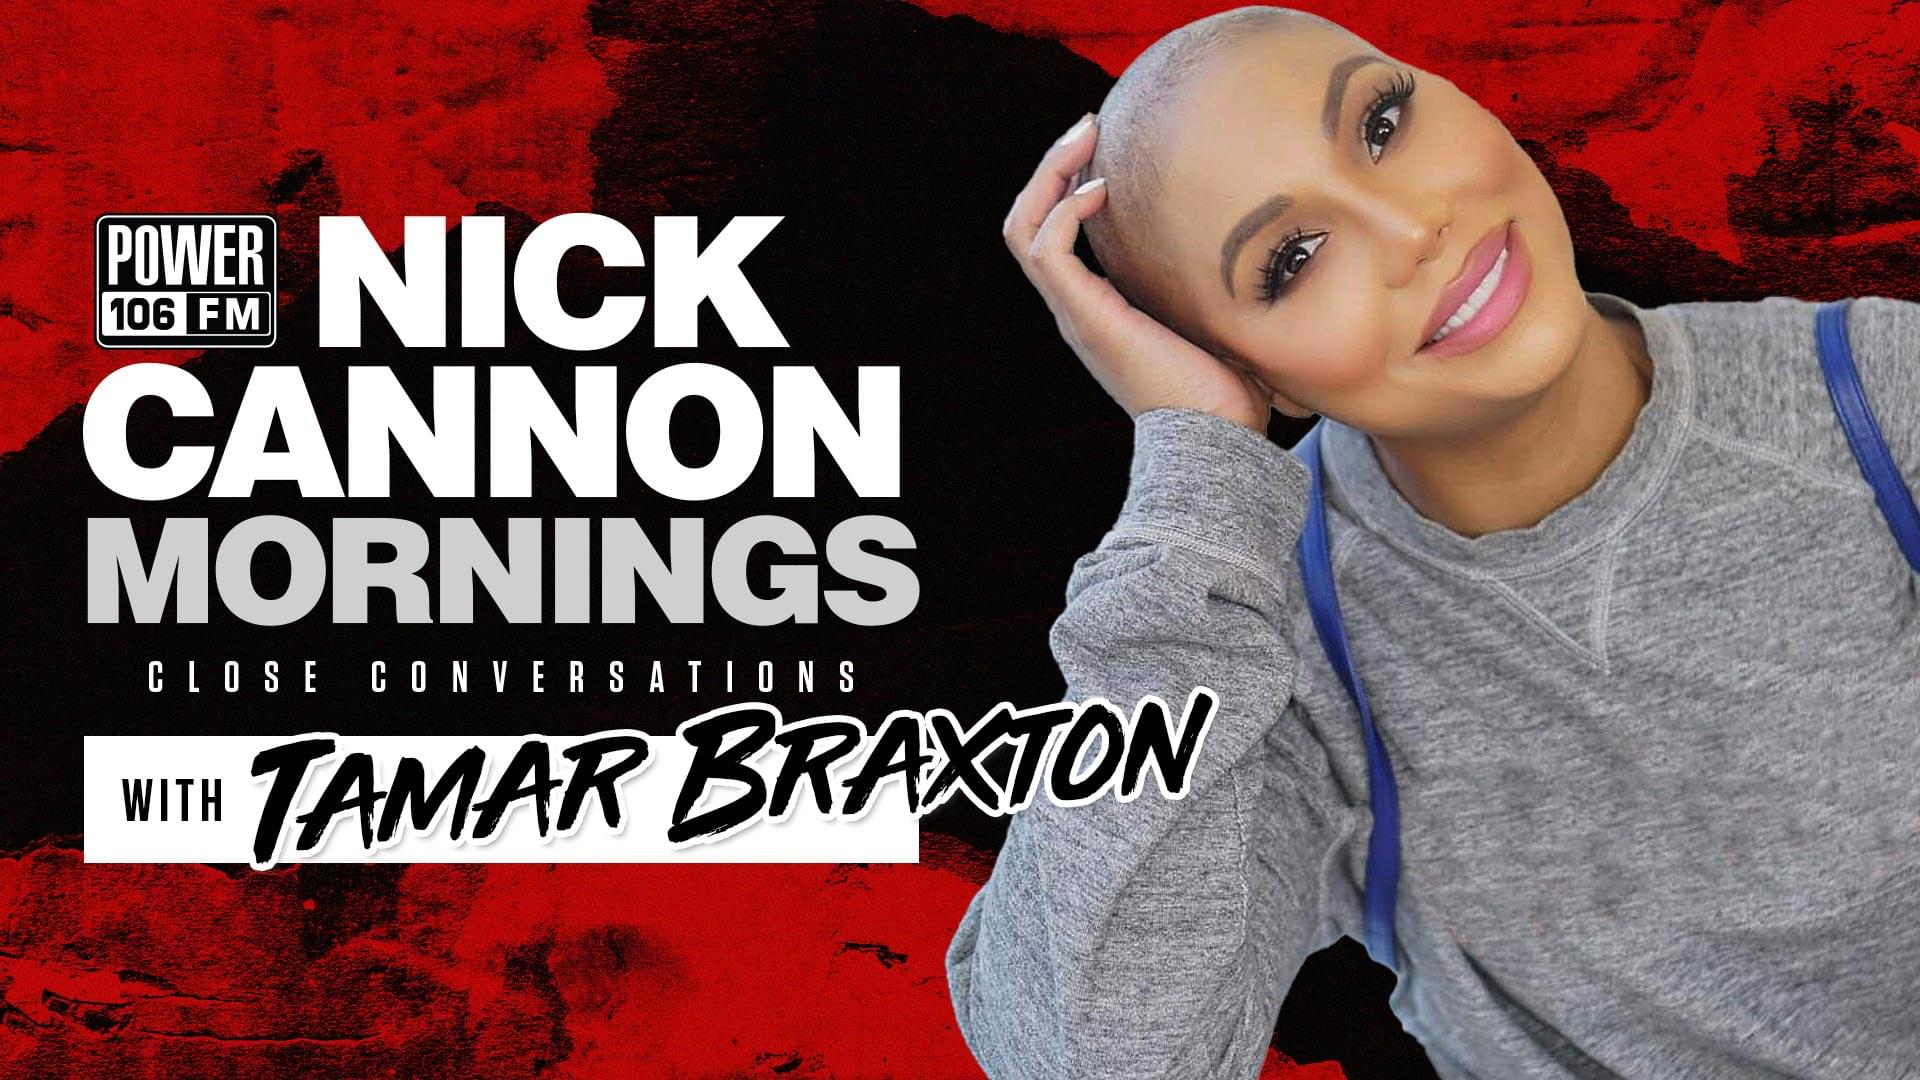 Tamar Braxton Talks New VH1 Show, Maintaining Family and Business, Her Musical Journey and More